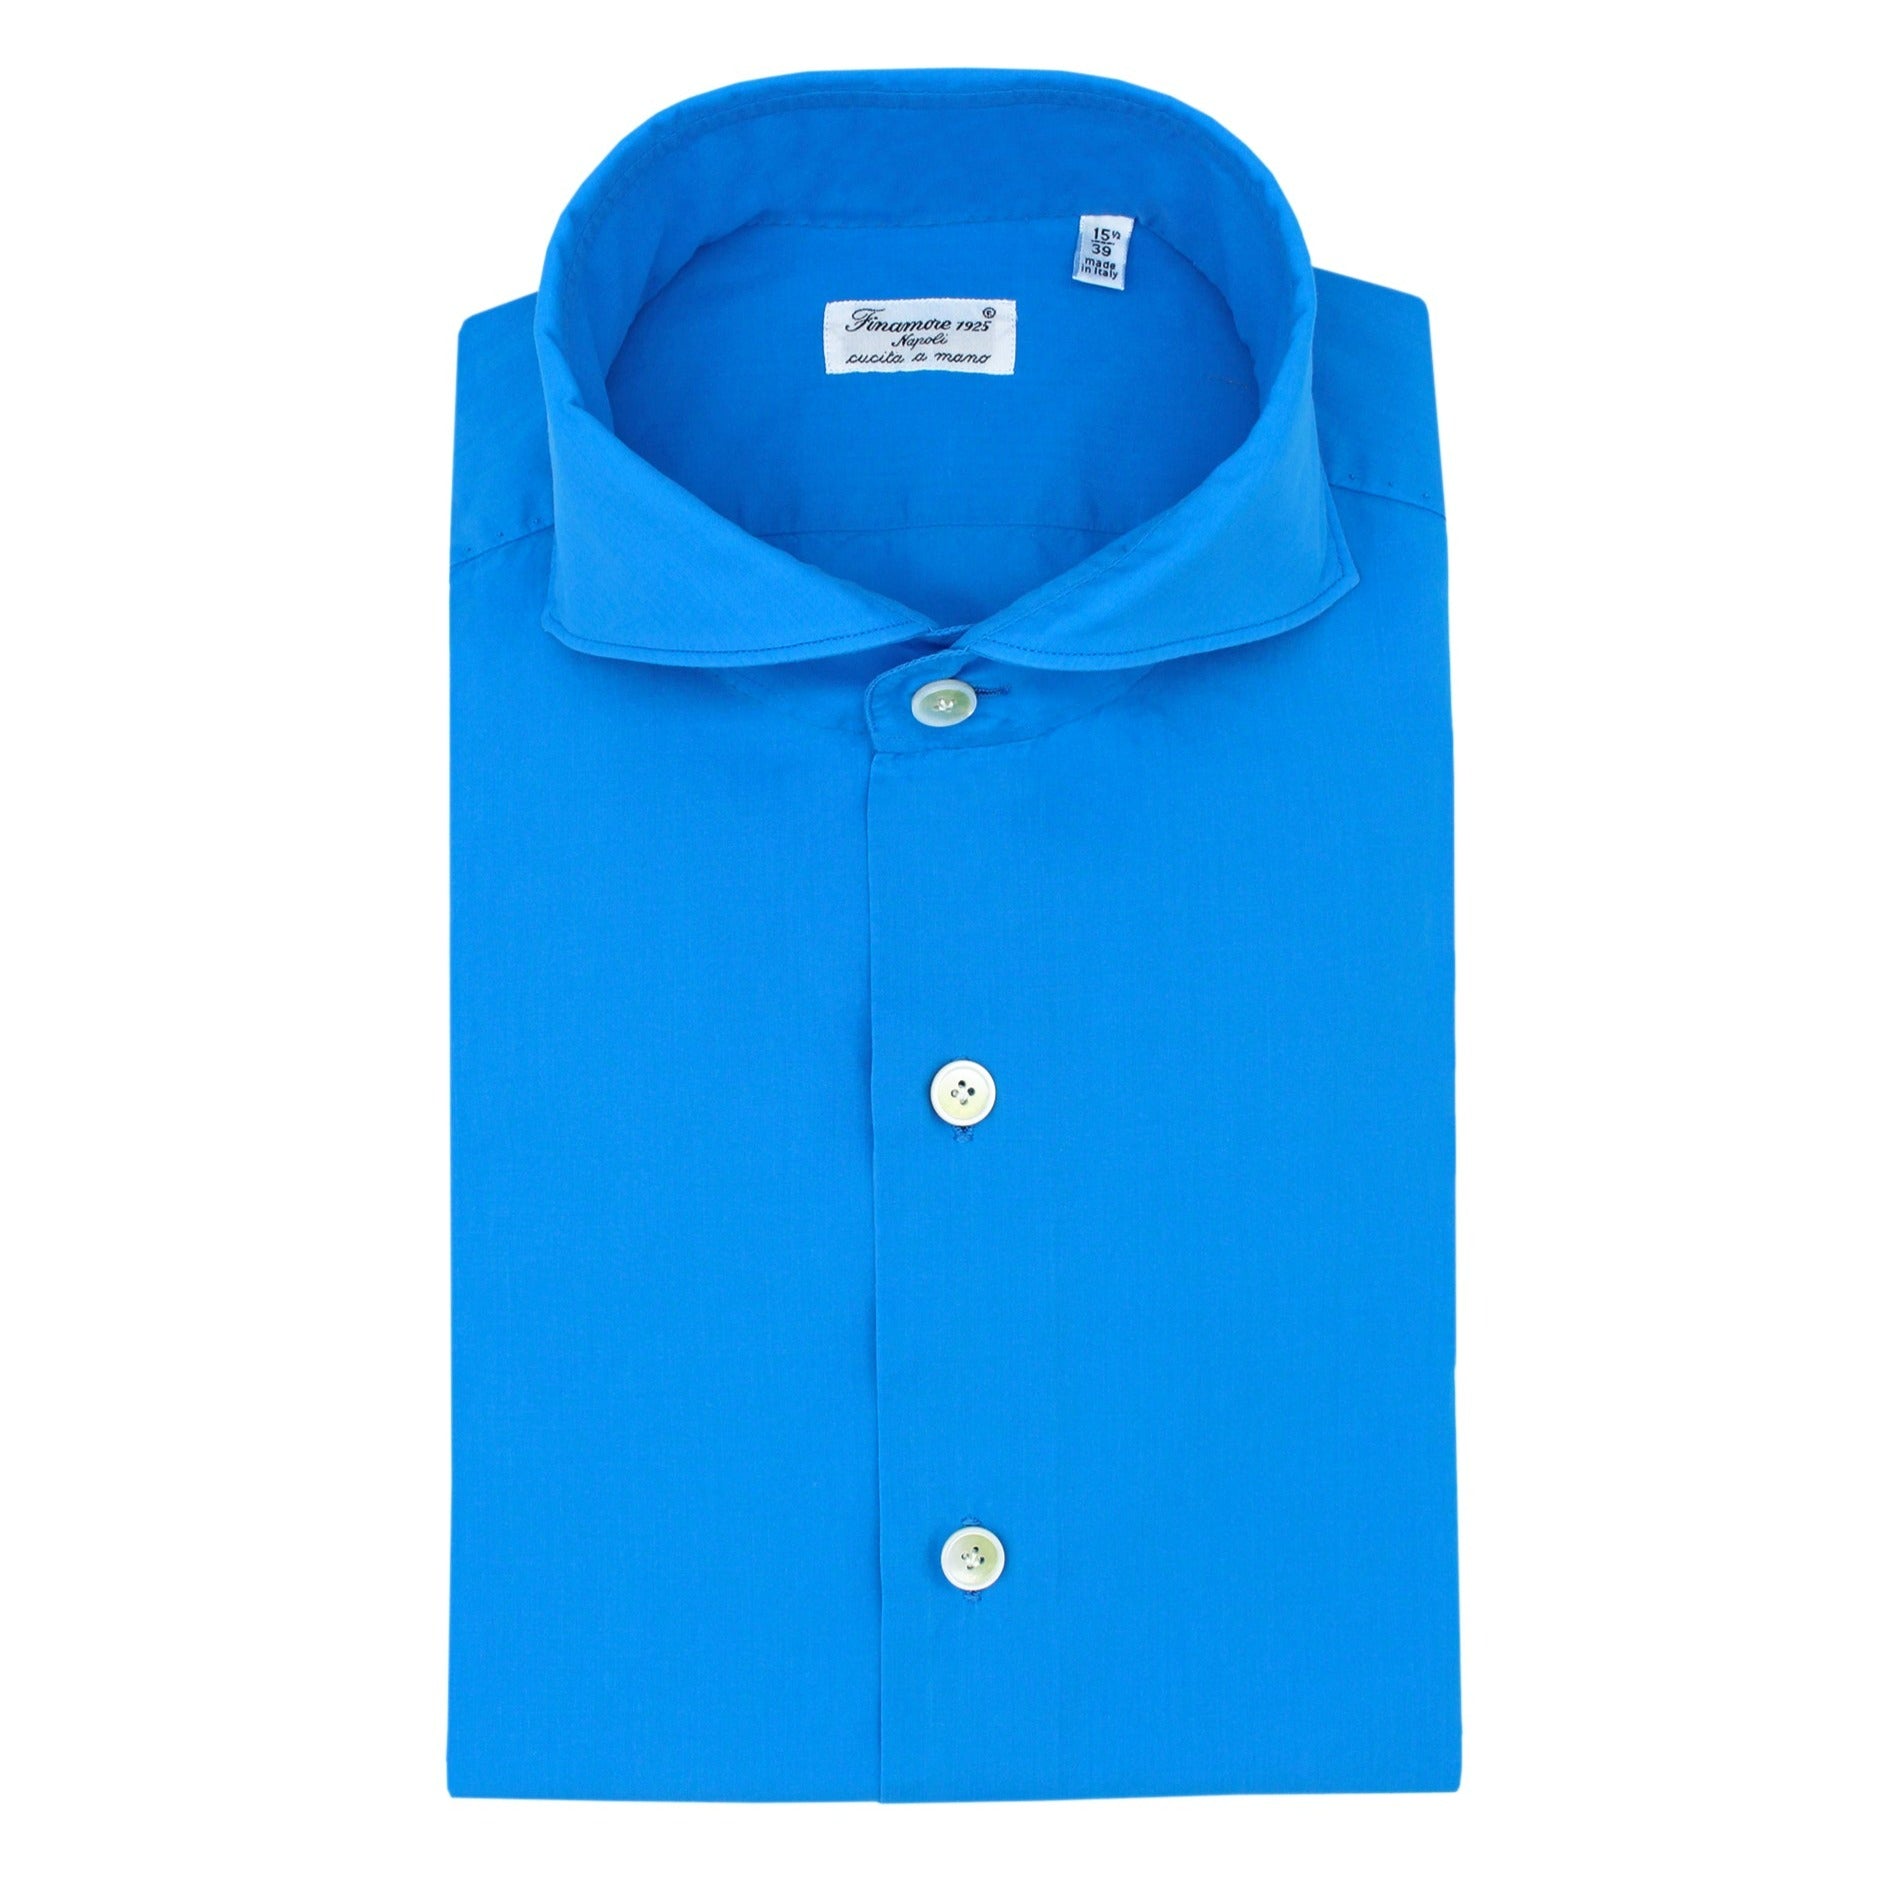 Carlo Riva cotton slim fit Milano shirt with enzyme treatment